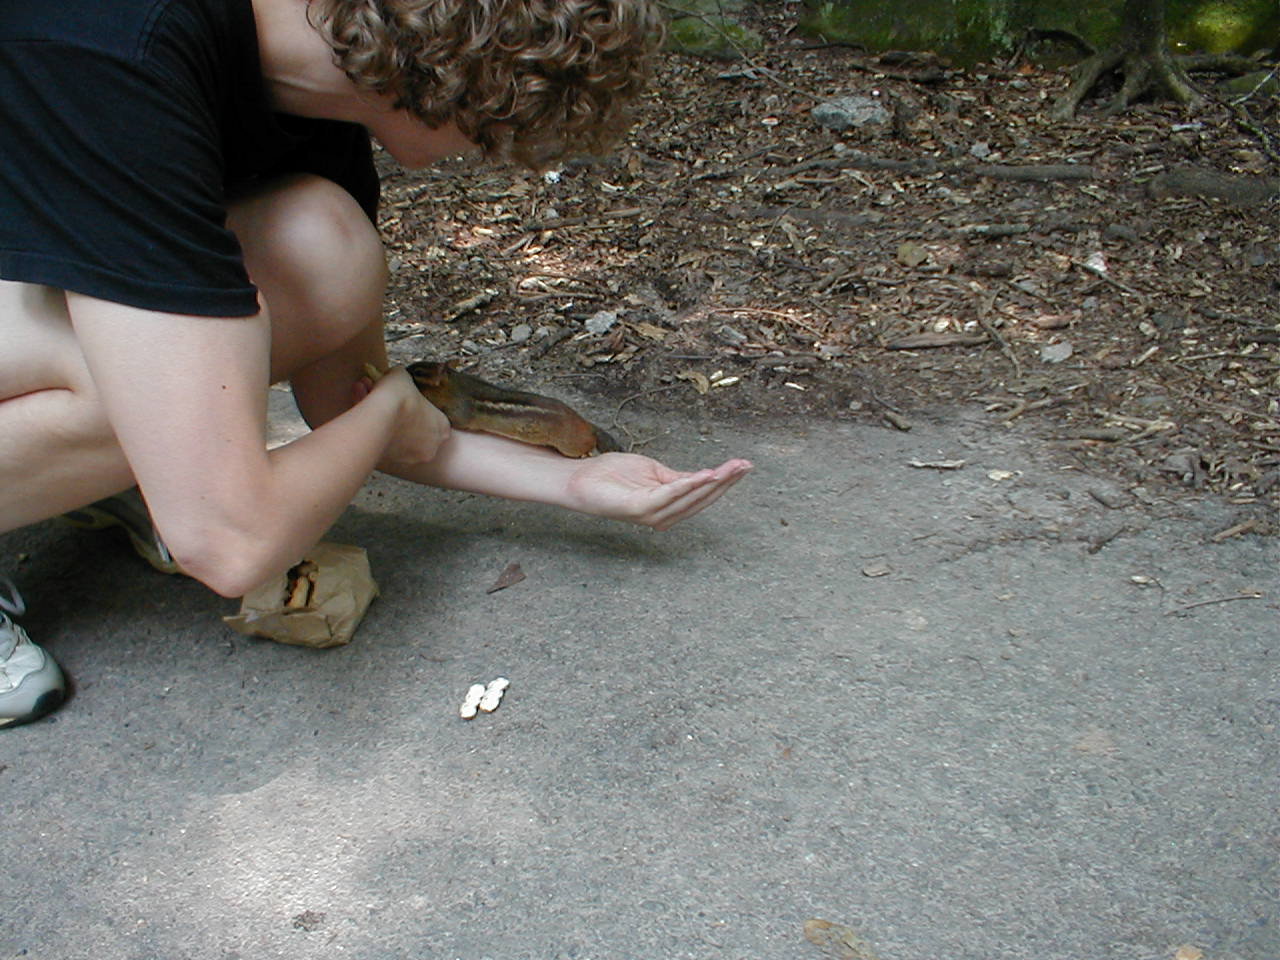 Amber with a Chipmunk